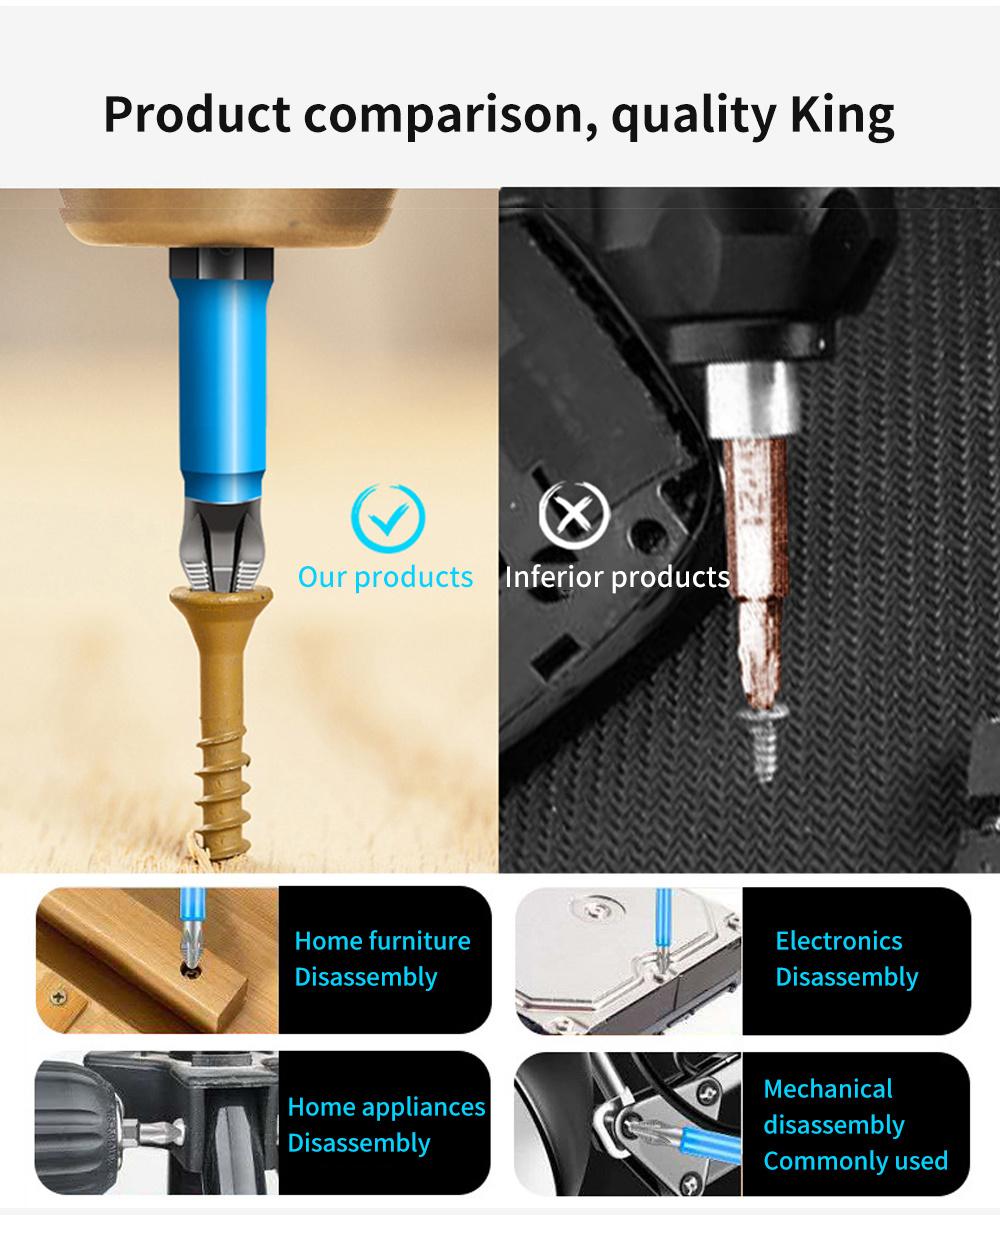 25mm-150mm 1/4" Hex Shank Fits Magnetic pH2 Long Reach Electric Screwdriver Bits Exactness Single Phillips/Cross Head Power Tool